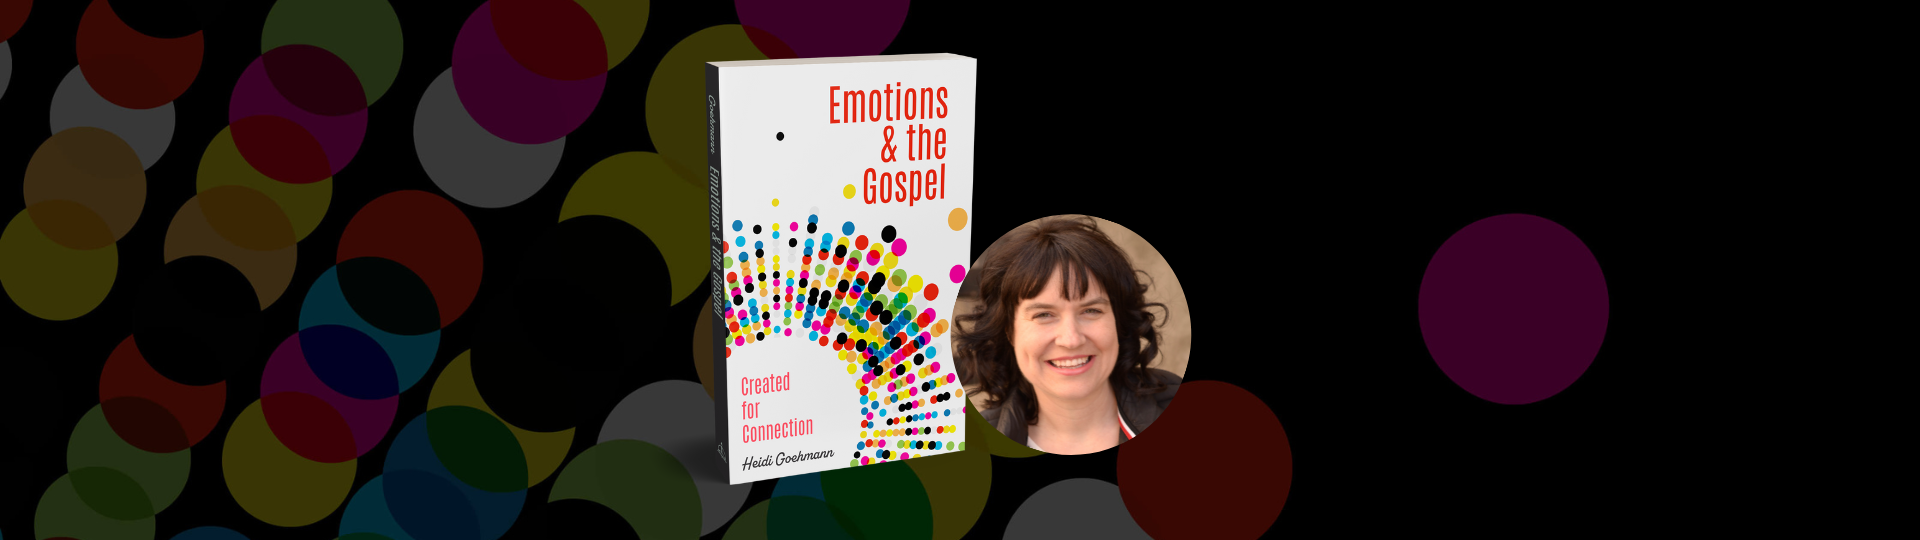 Press Release: Rethink How You View Emotion